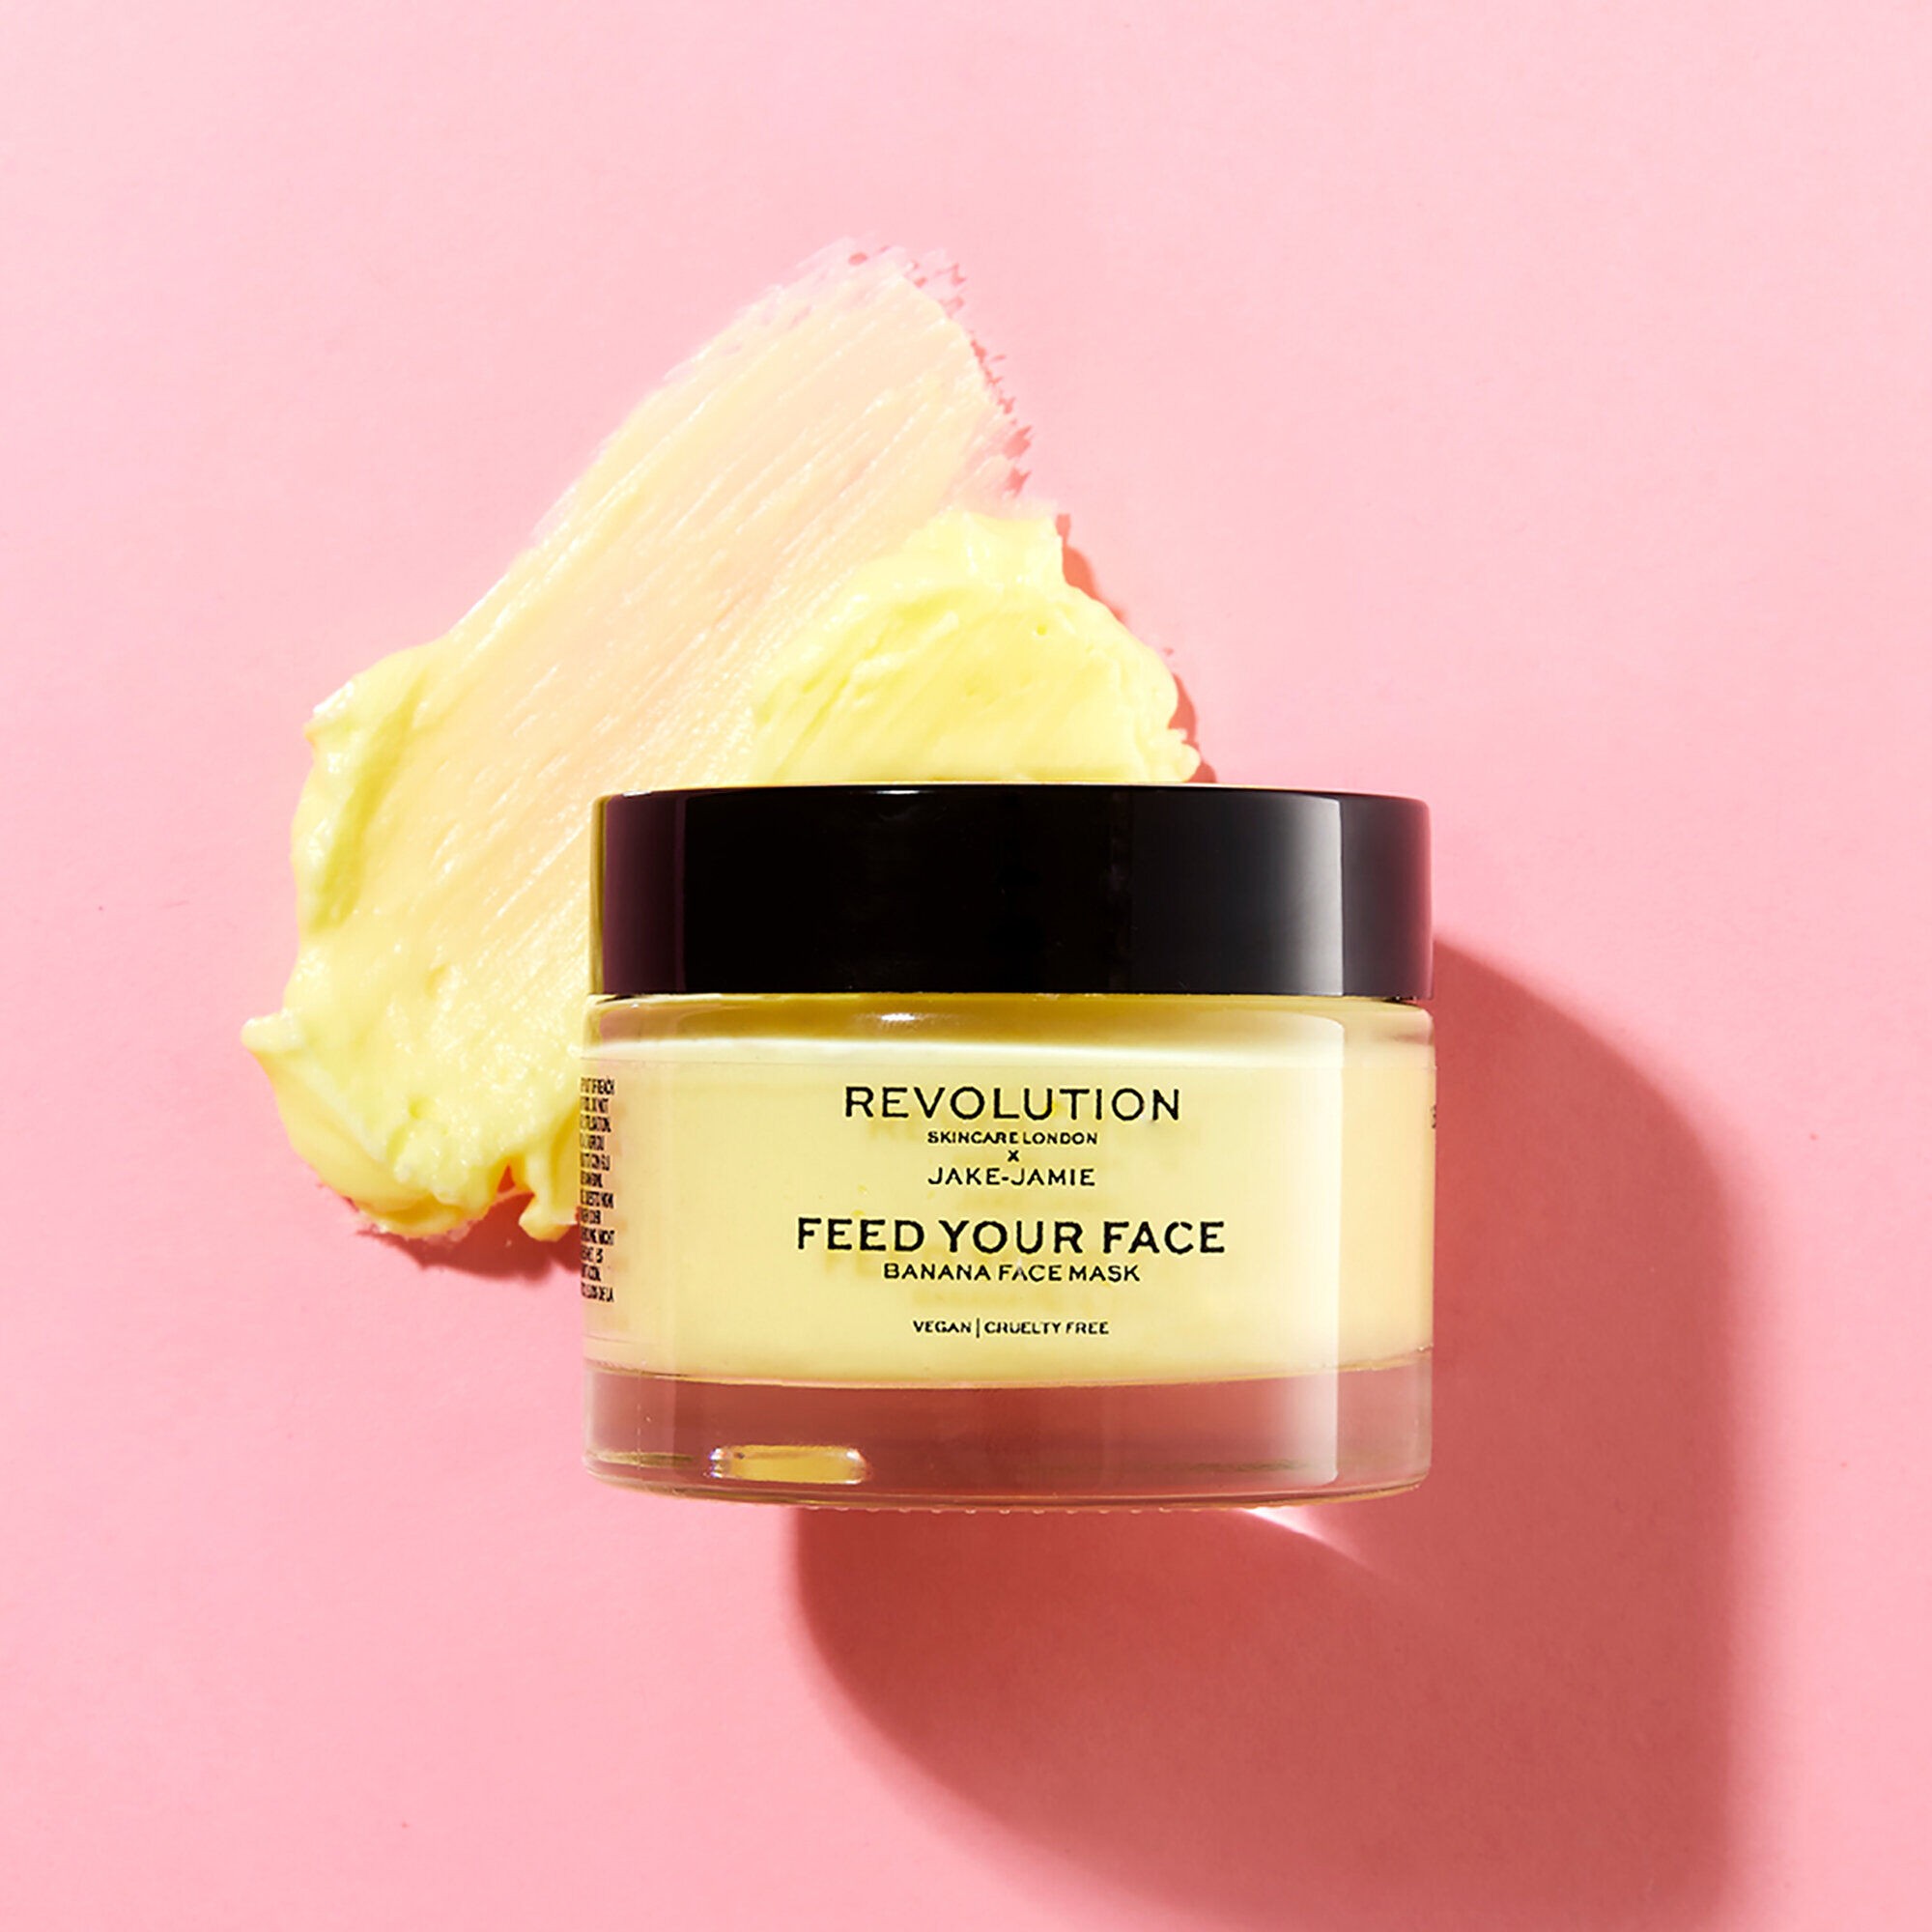 Revolution Skincare x Jake-Jamie - Feed Your Face Trilogy Face Mask Collection 